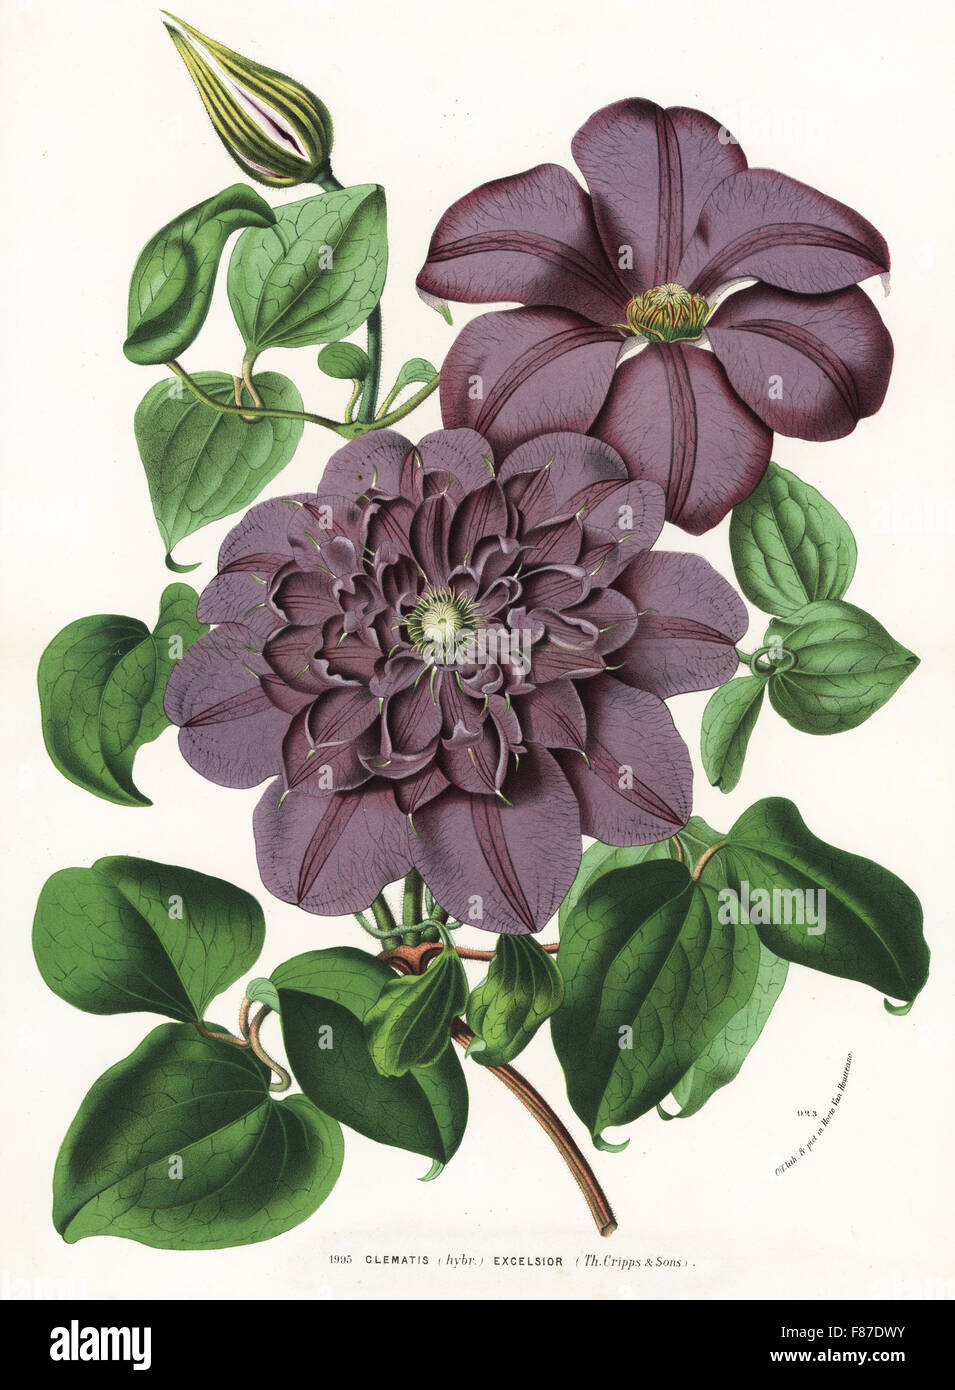 Clematis excelsior hybrid raised by Thomas Cripps. Handcoloured lithograph from Louis van Houtte and Charles Lemaire's Flowers of the Gardens and Hothouses of Europe, Flore des Serres et des Jardins de l'Europe, Ghent, Belgium, 1874. Stock Photo